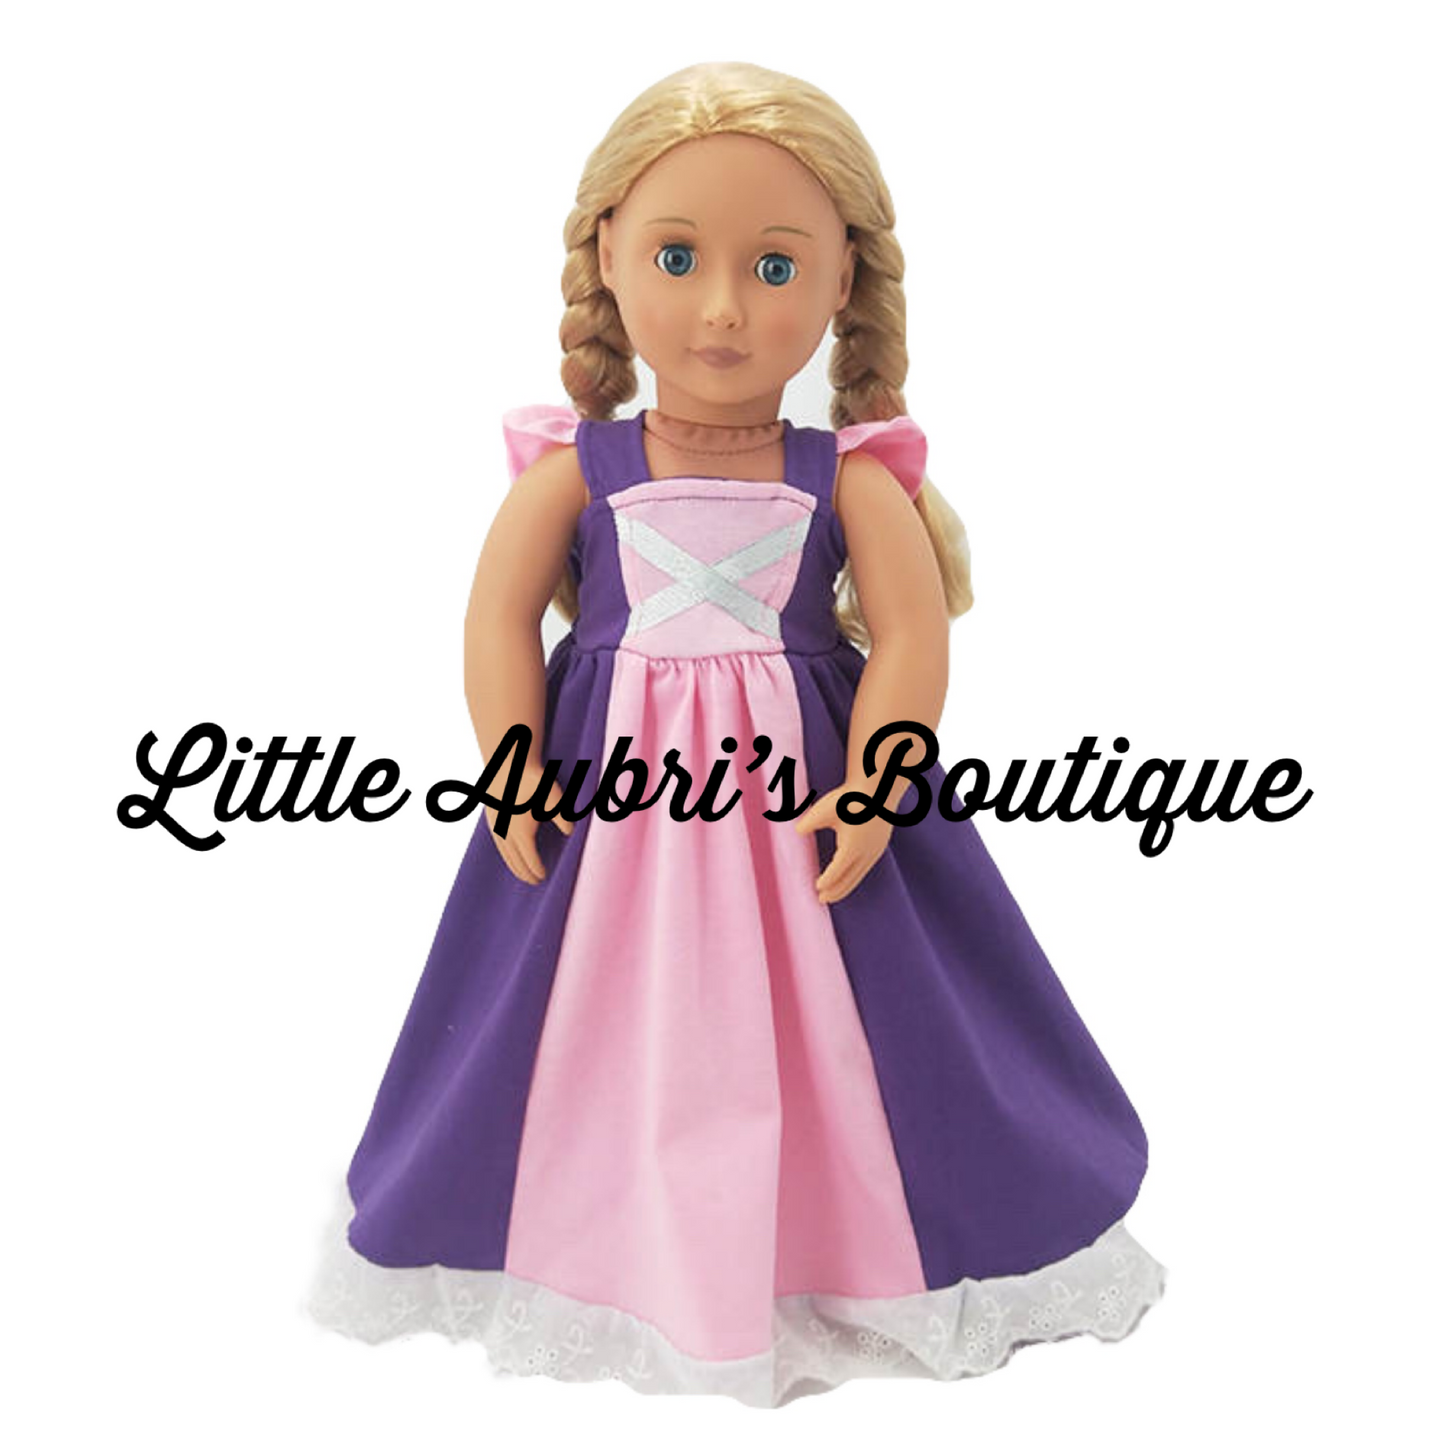 PREORDER Tower Princess 18 in. Doll Dress CLOSES 3/27